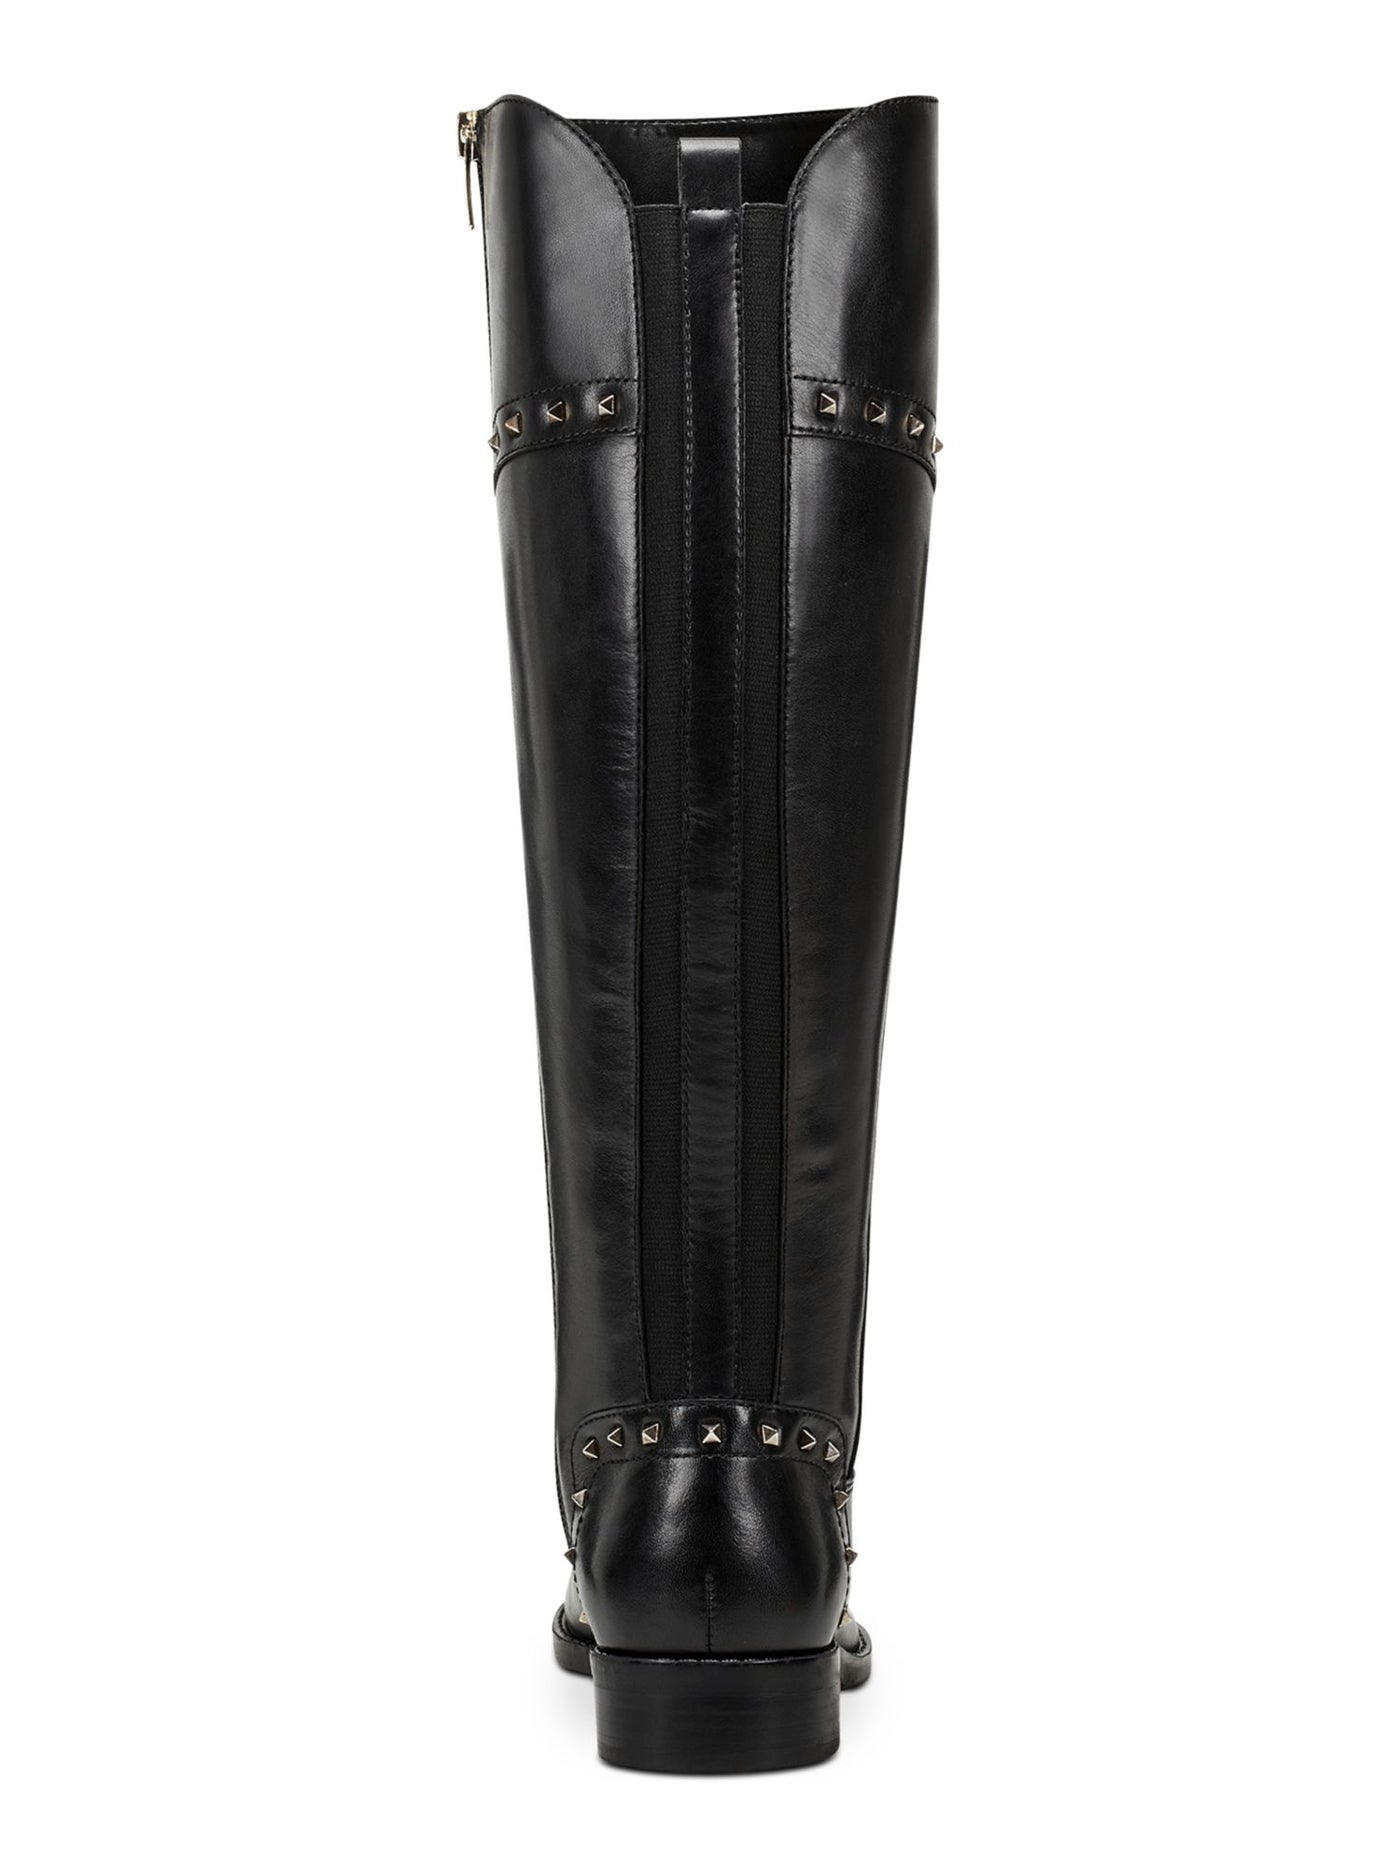 MARC FISHER Womens Black Flex Gore Back Accents Studded Cushioned Slip Resistant Water Resistant Secalm Round Toe Block Heel Zip-Up Riding Boot 6.5 M